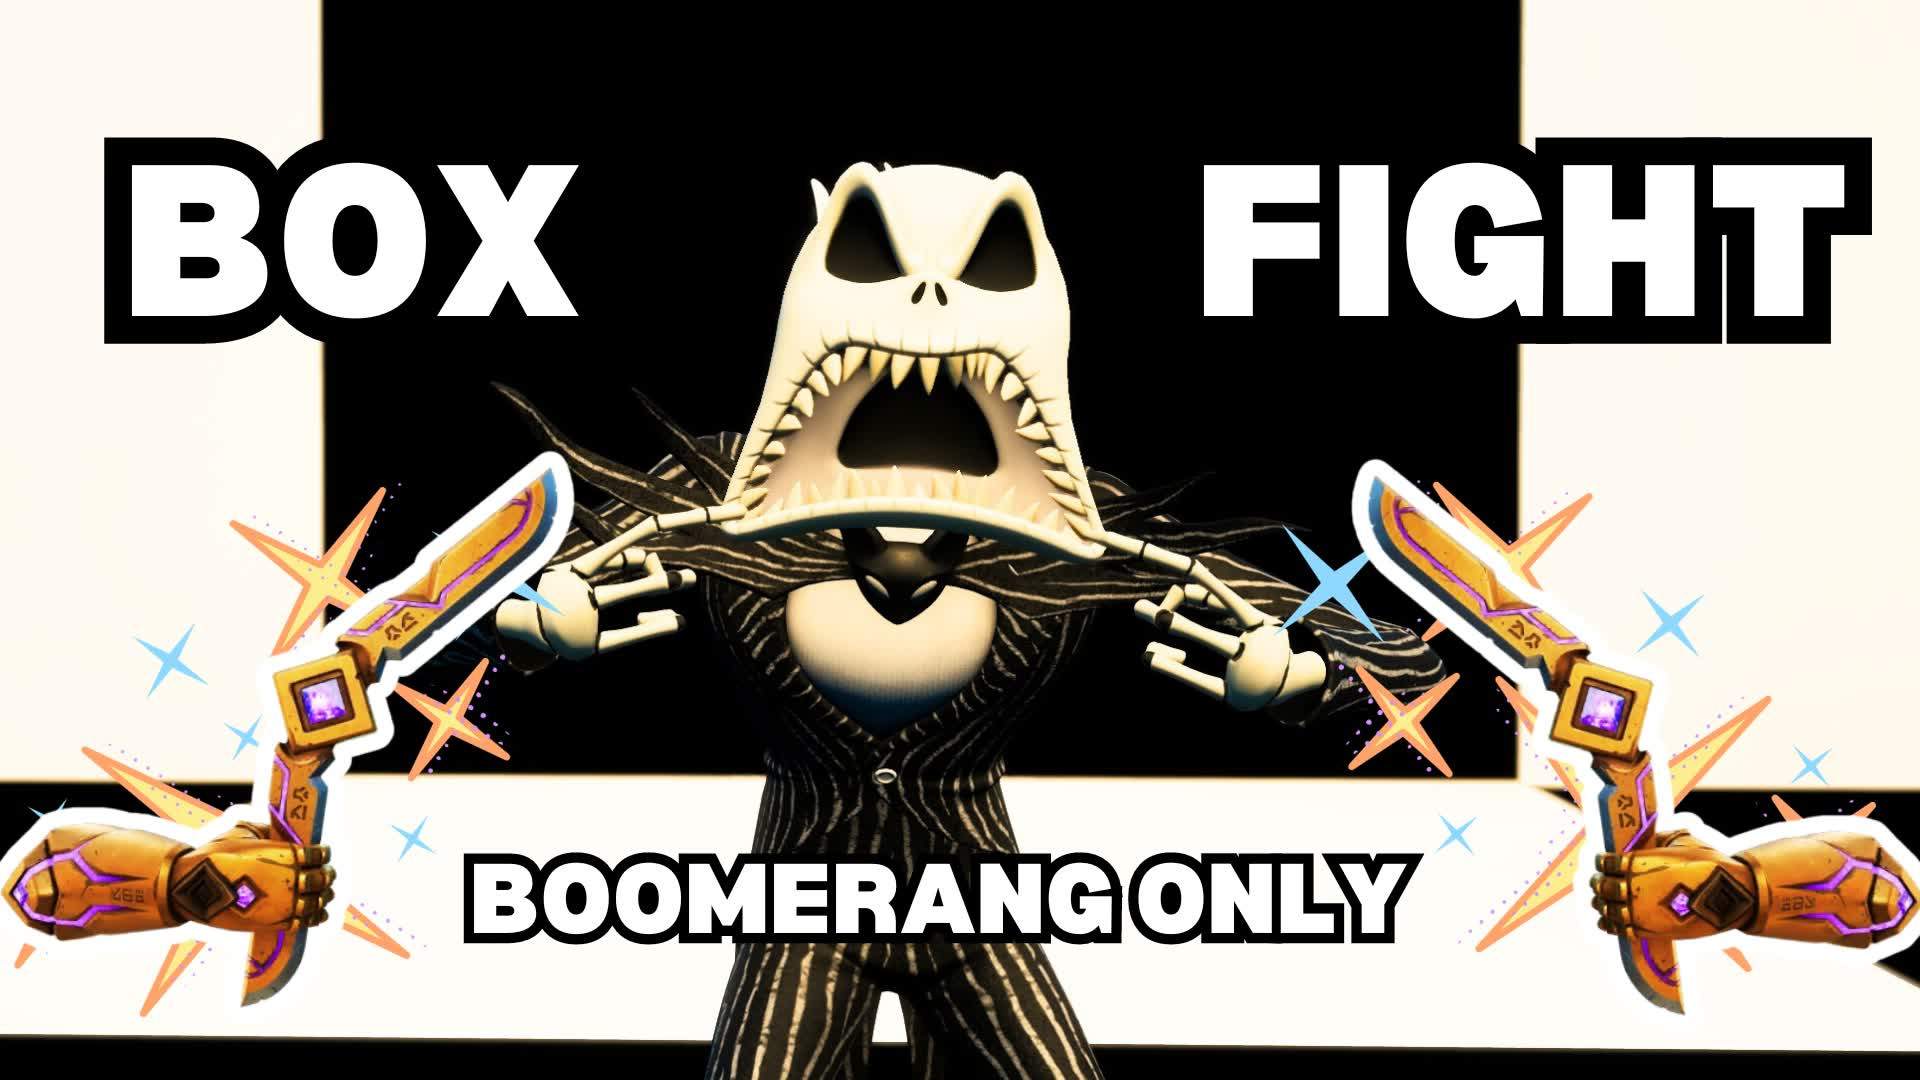 BOX FIGHT BOOMERANG ONLY-BLACK AND WHITE